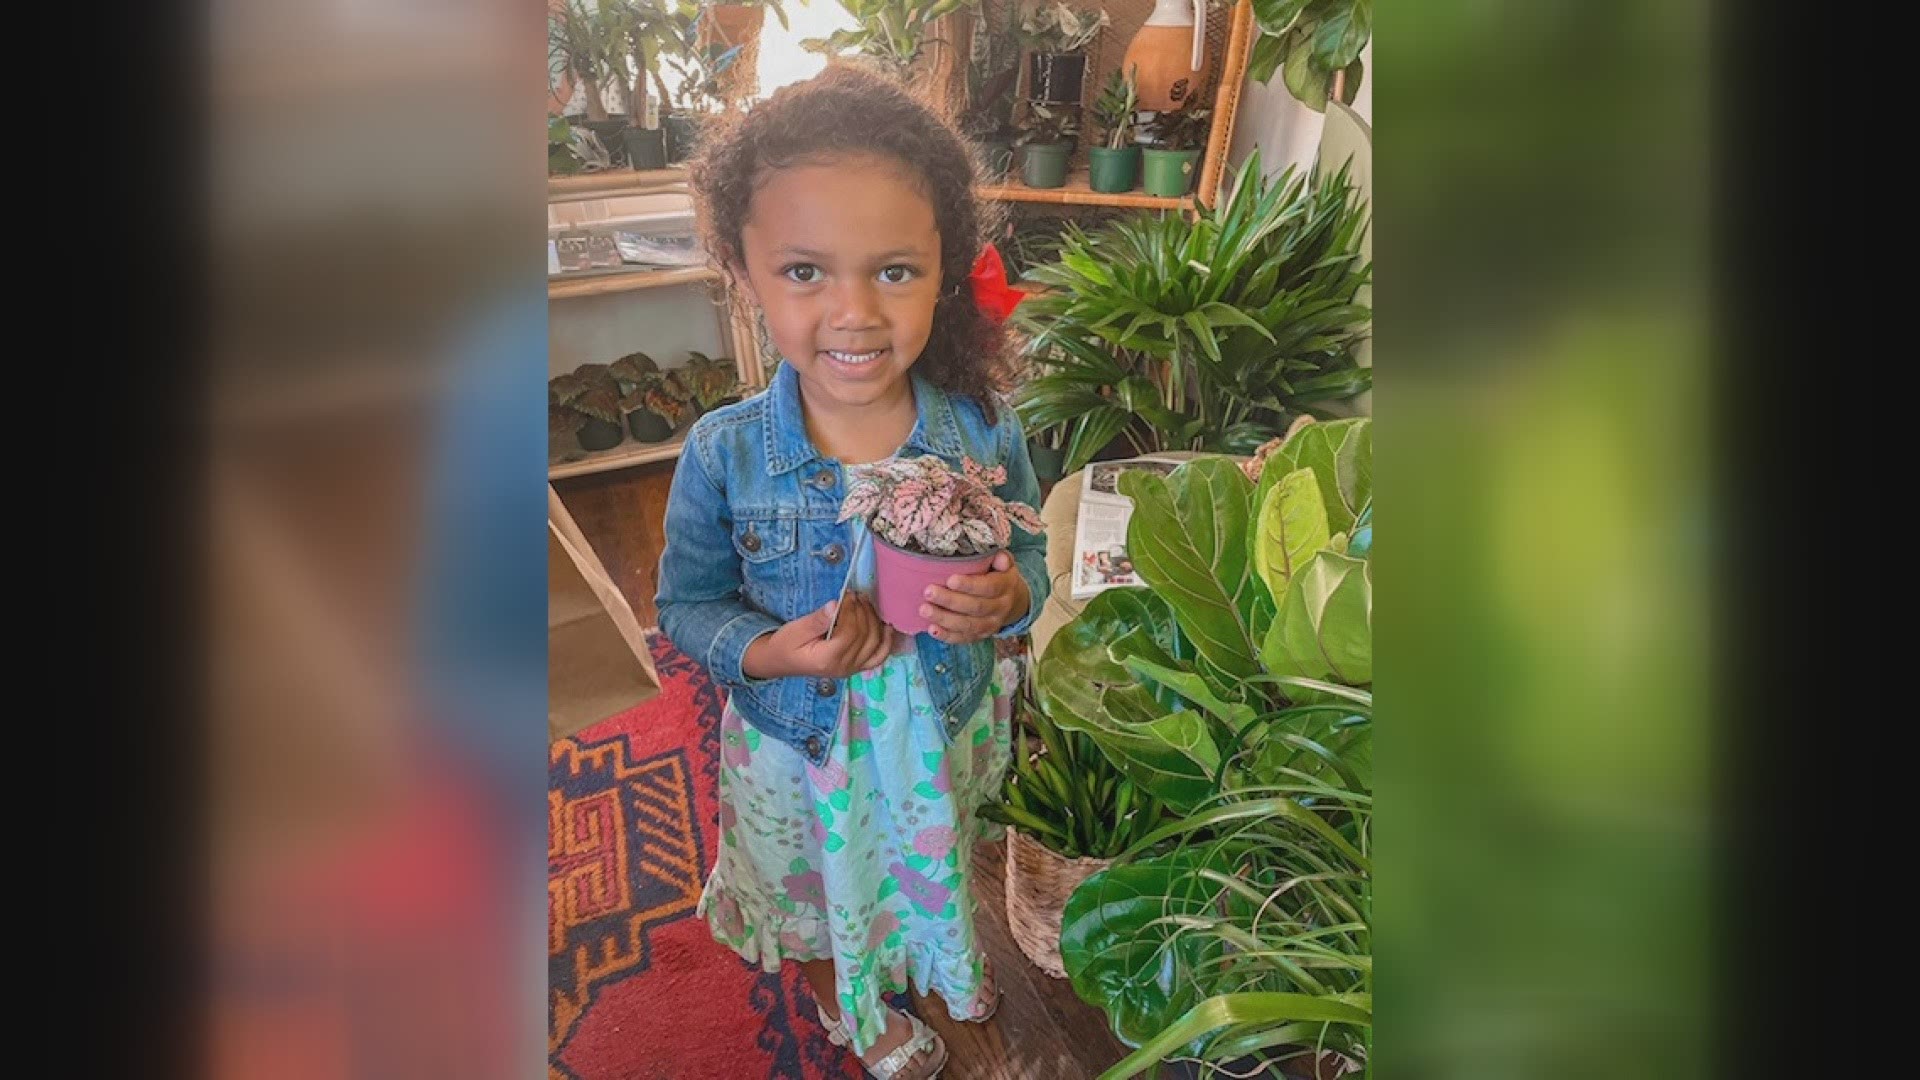 The Plant Project is the first Black woman-owned plant shop in Dallas. Founder Bree Clarke says it was created to celebrate community, culture, and plants.